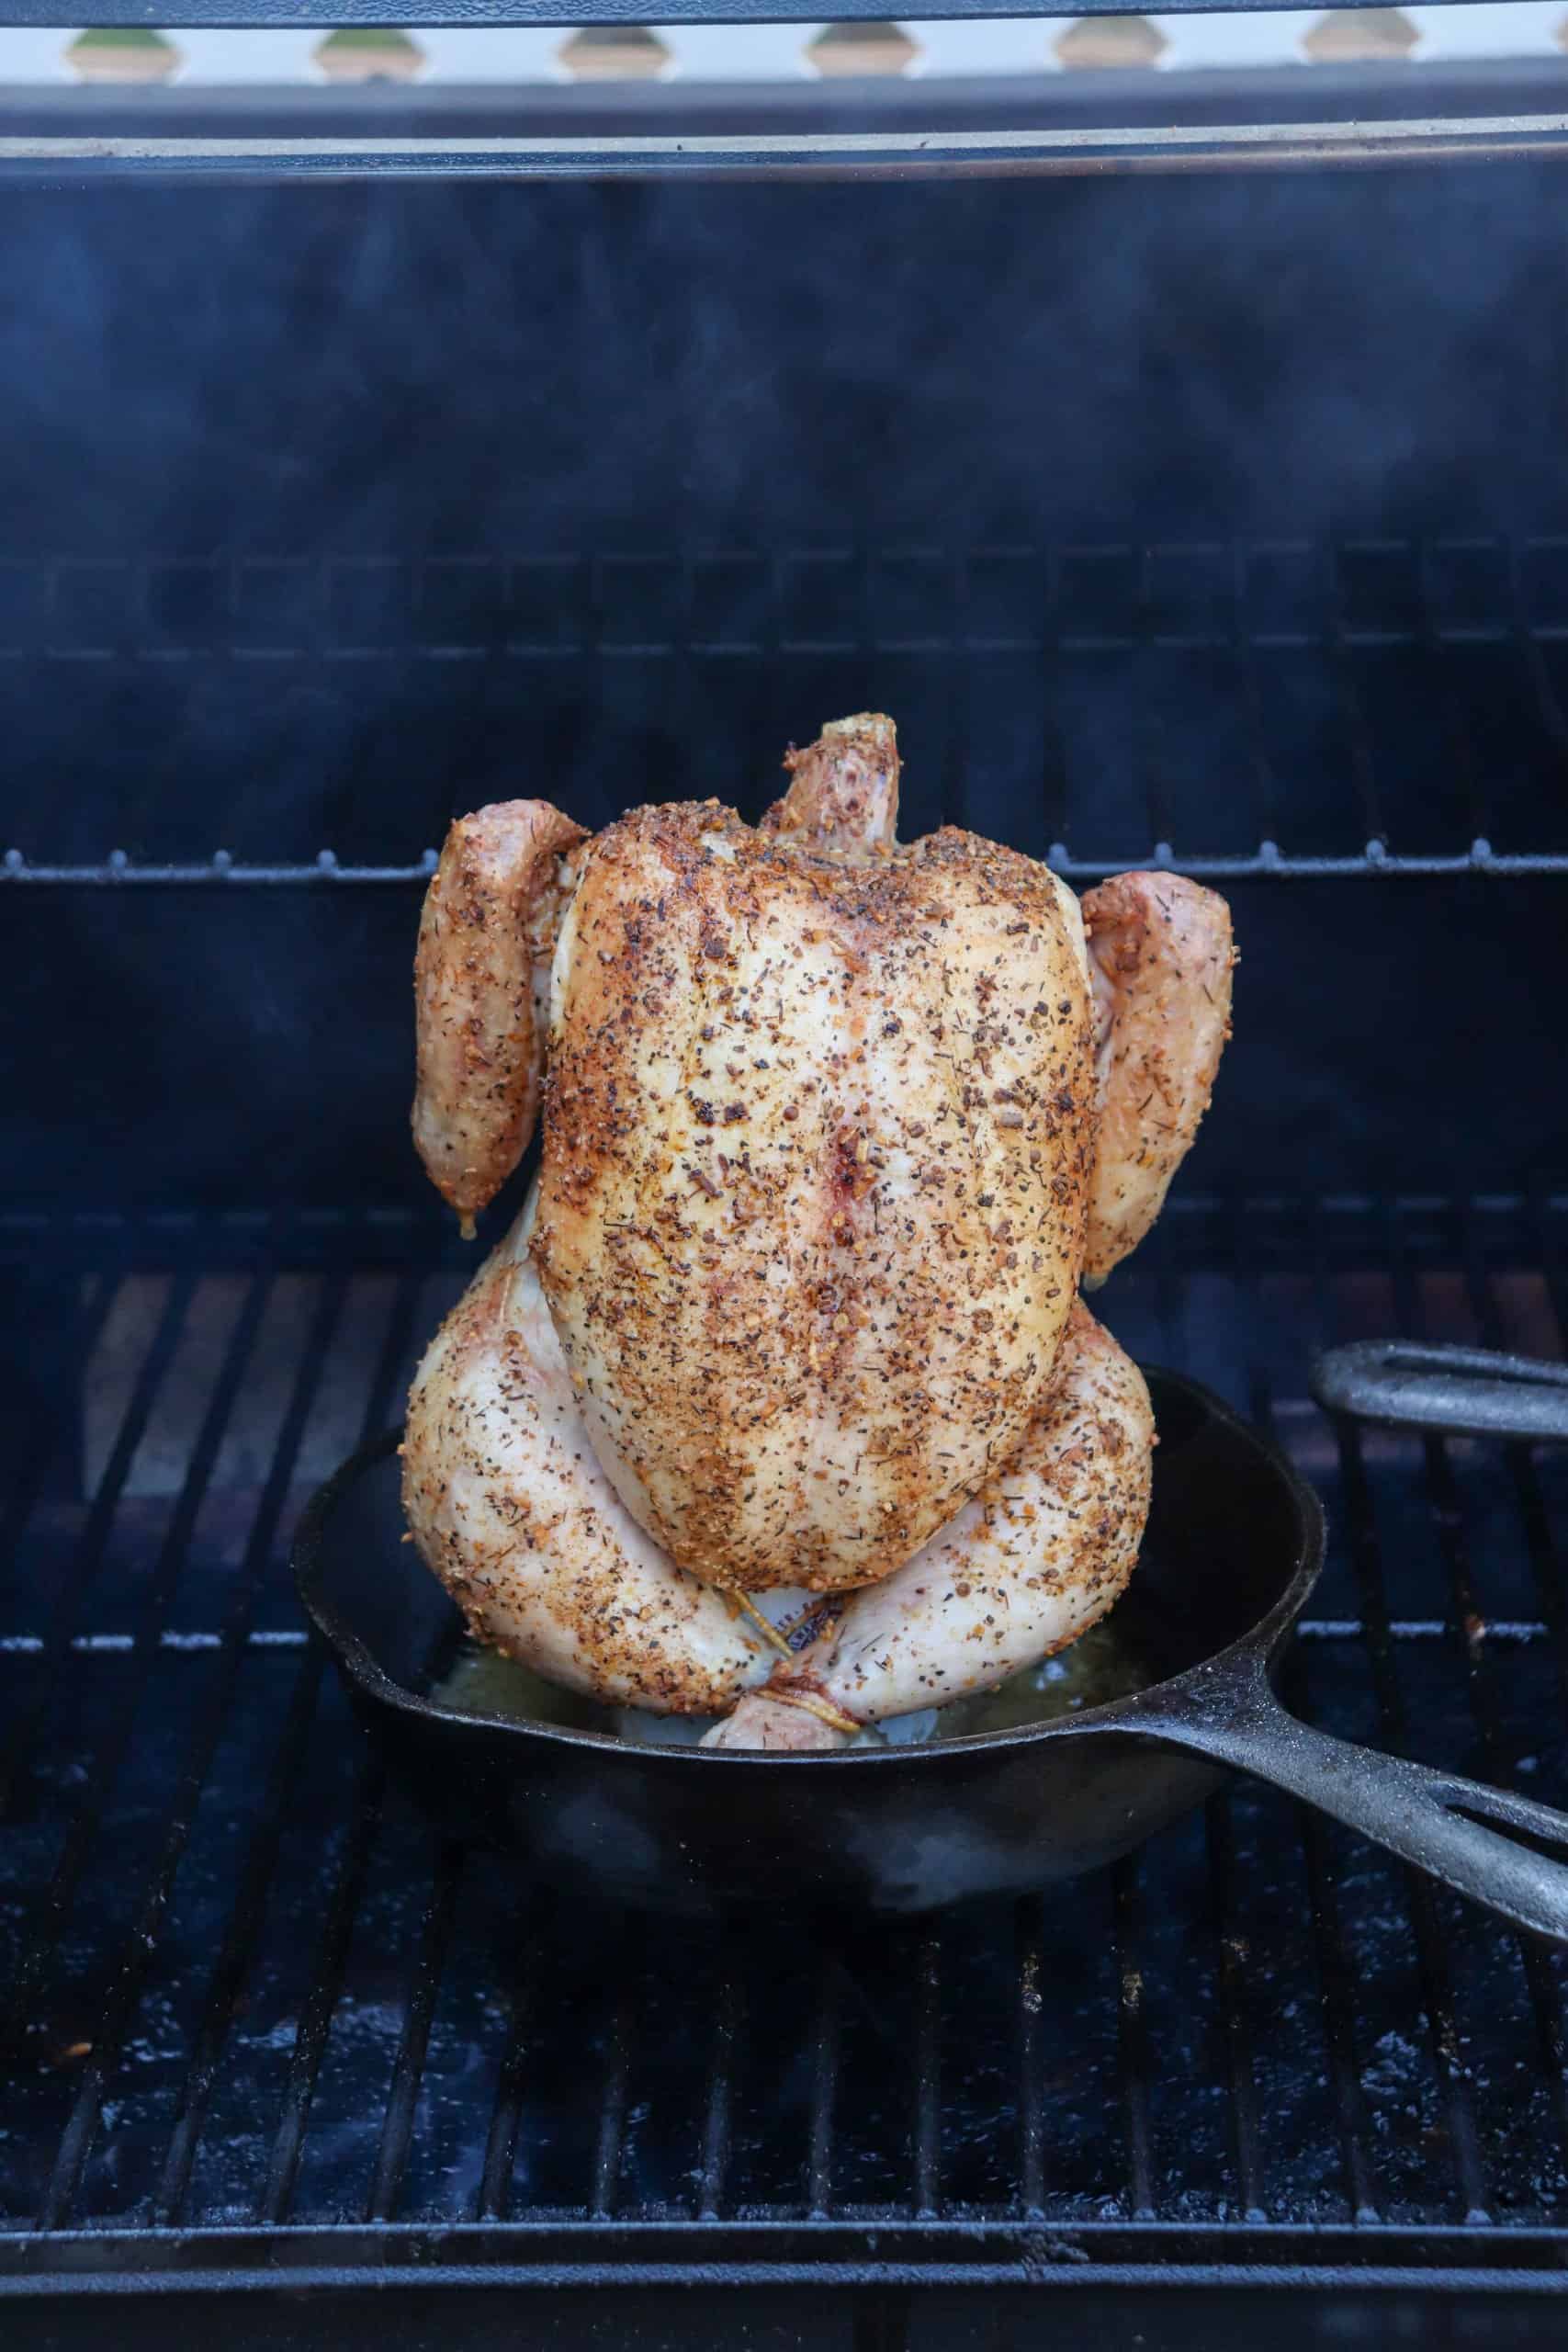 Easy Beer Can Chicken Recipe